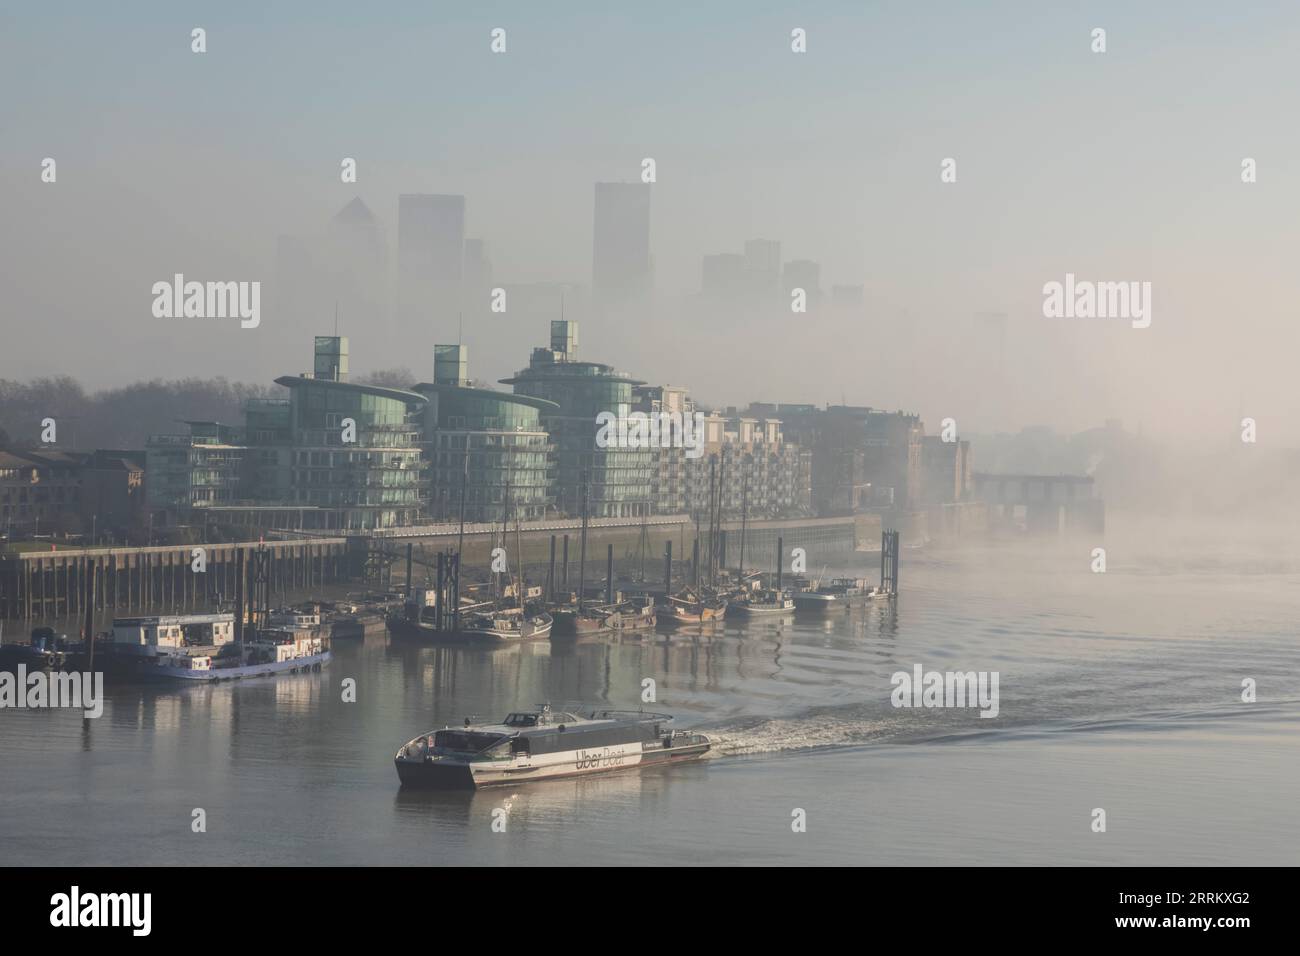 England, London, Docklands, River Thames and Canary Wharf Skyline in the Morning Mist Stock Photo